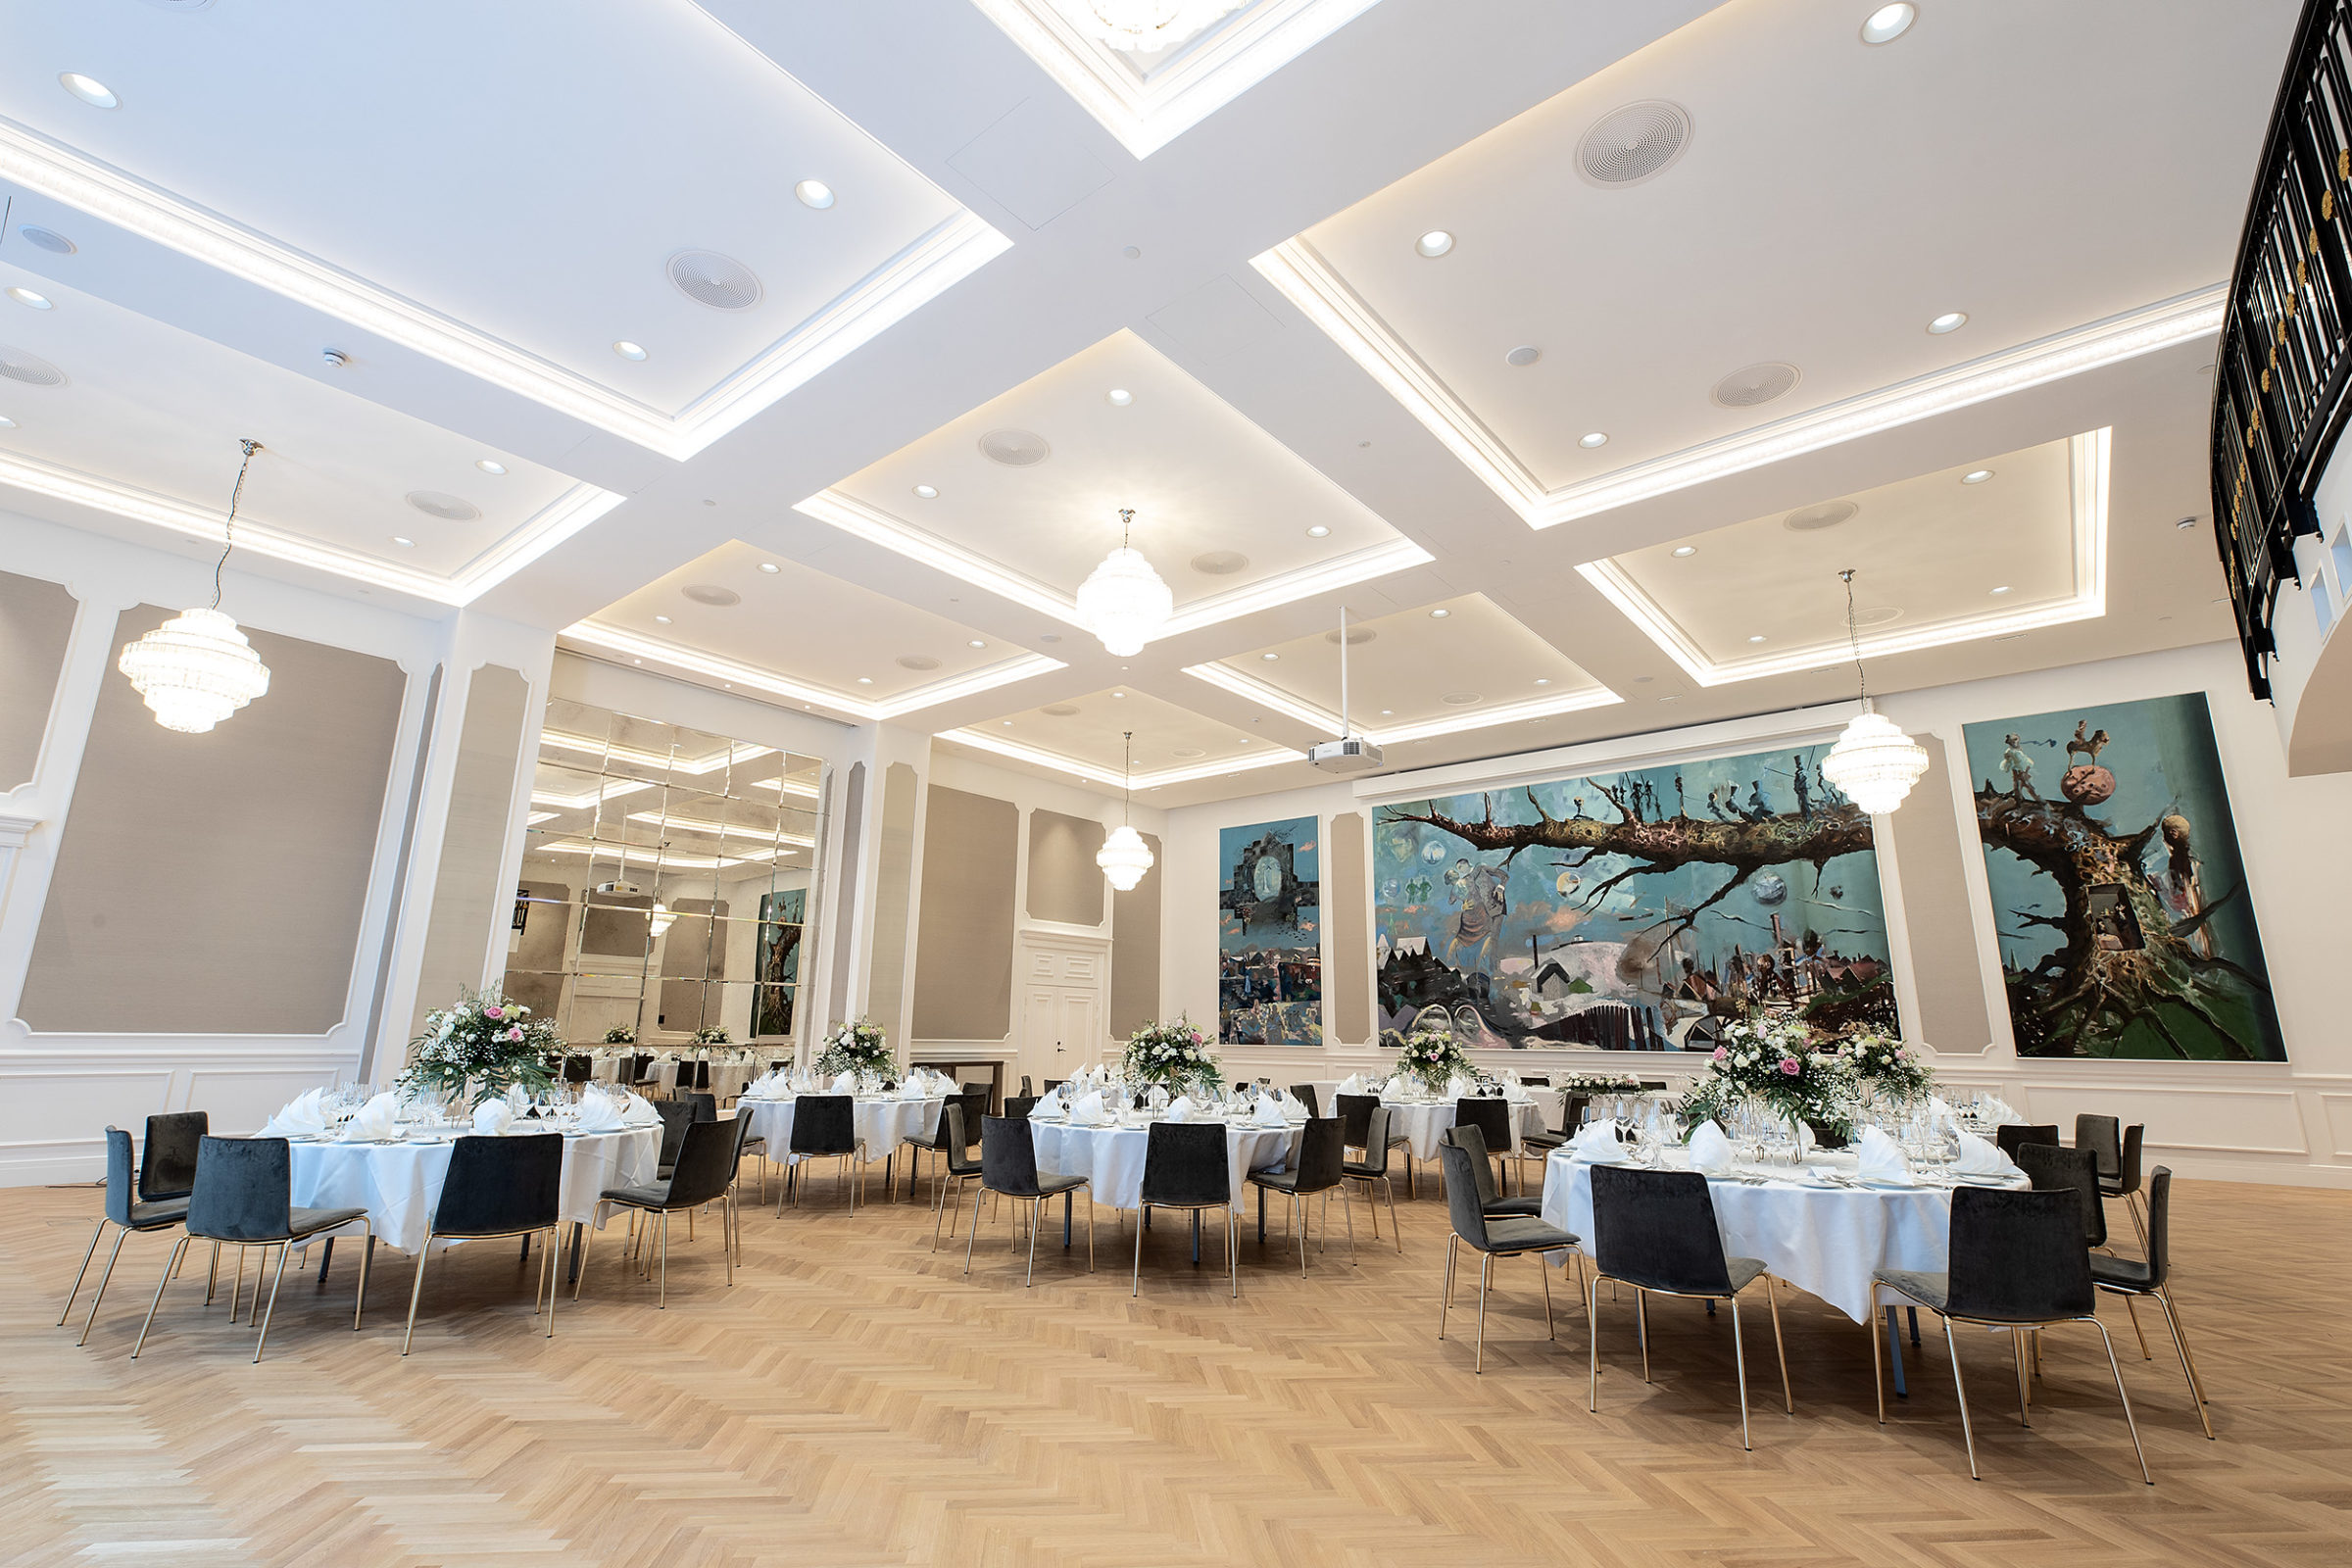 Britannia Hall with round table seatings and beautiful artwork on the walls